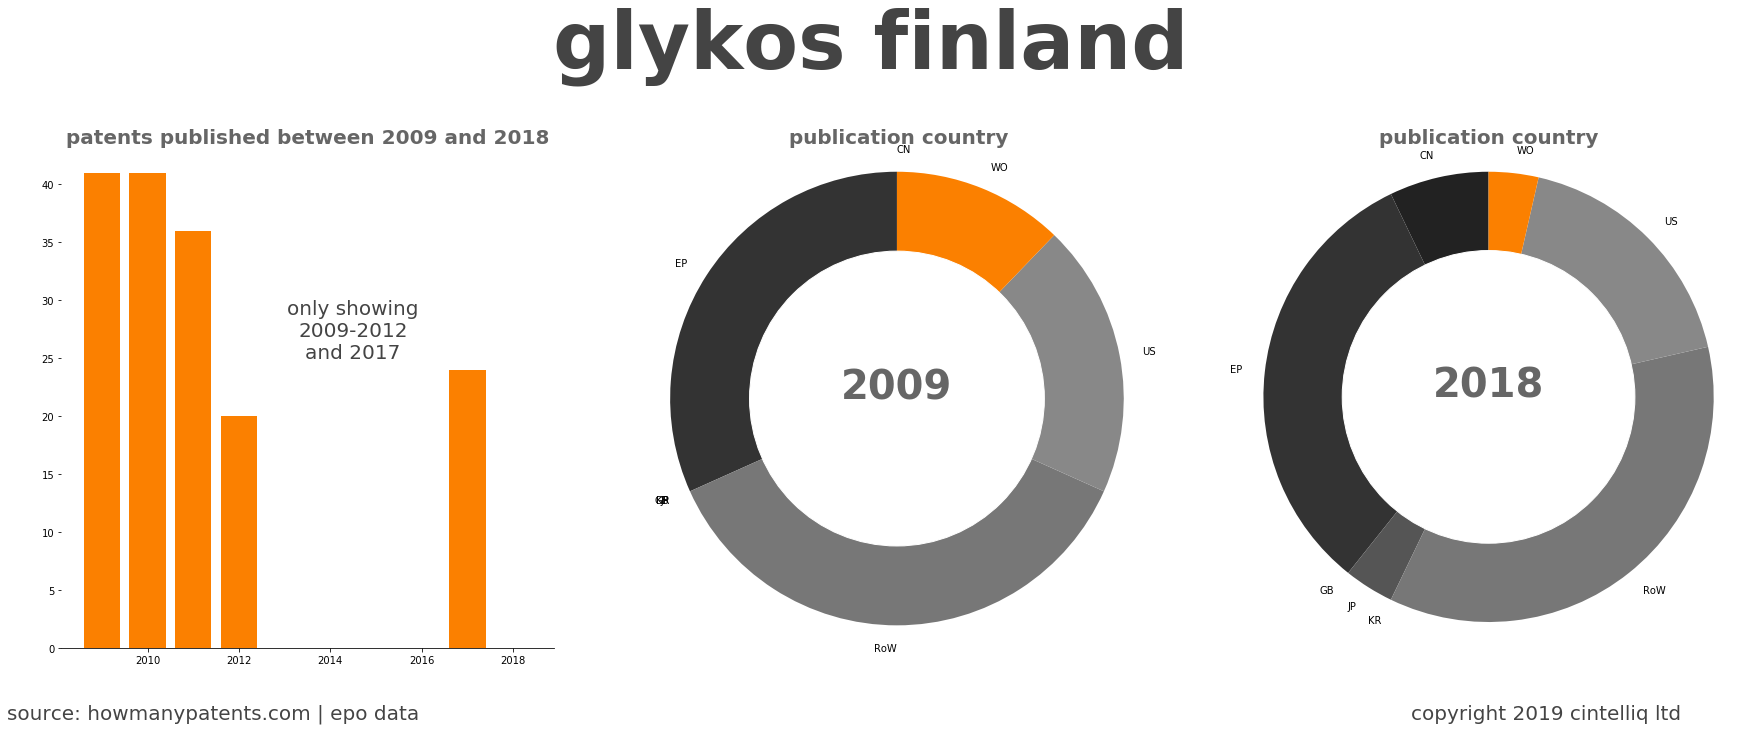 summary of patents for Glykos Finland